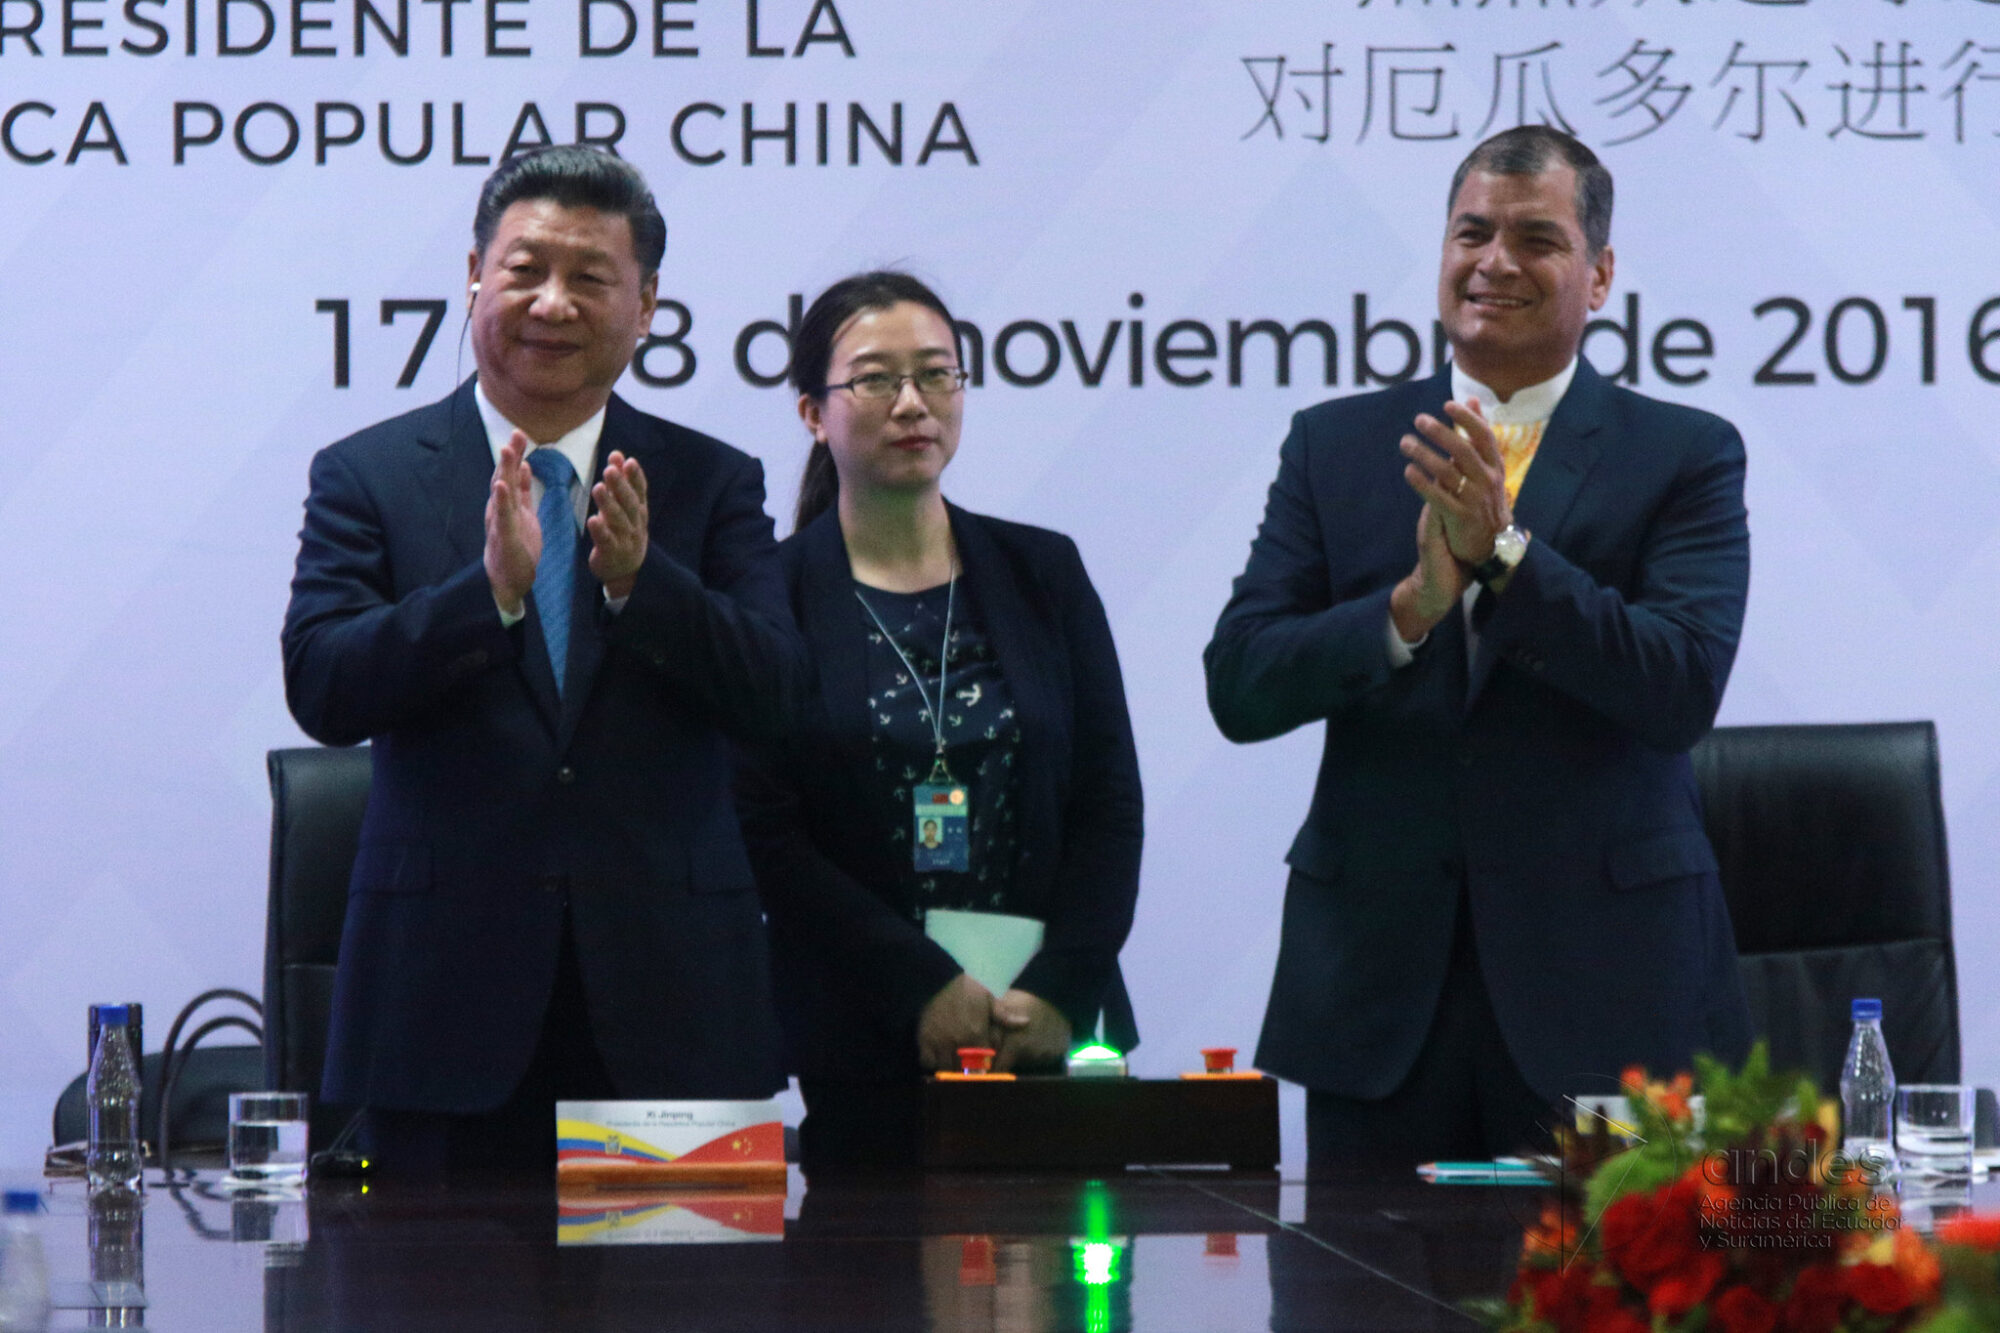 Chinese Ambassador Chen Guoyou and President Guillermo Lasso